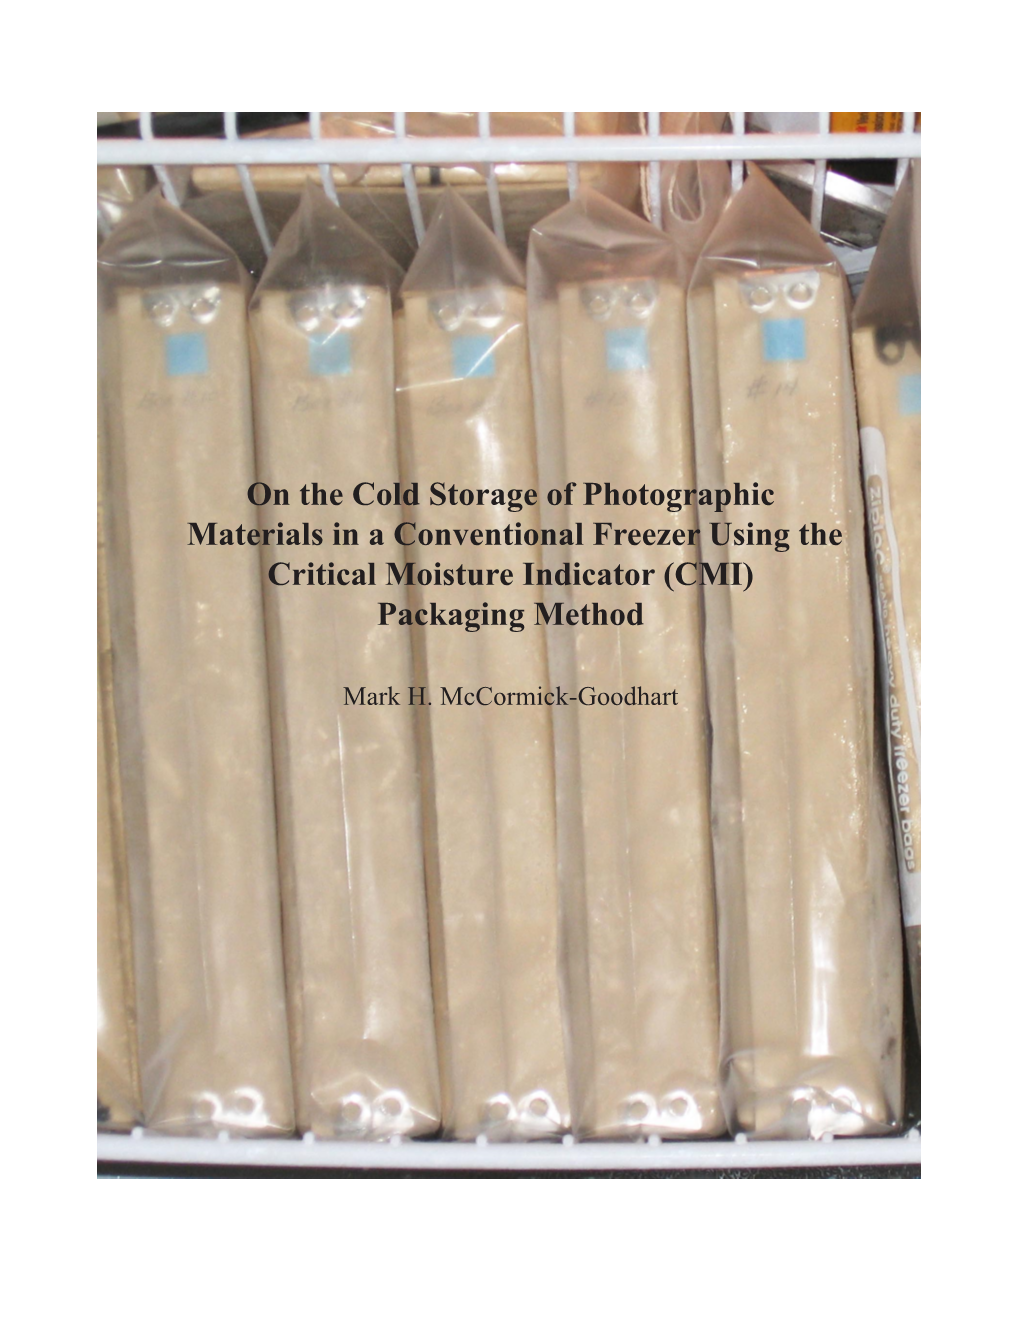 On the Cold Storage of Photographic Materials in a Conventional Freezer Using the Critical Moisture Indicator (CMI) Packaging Method